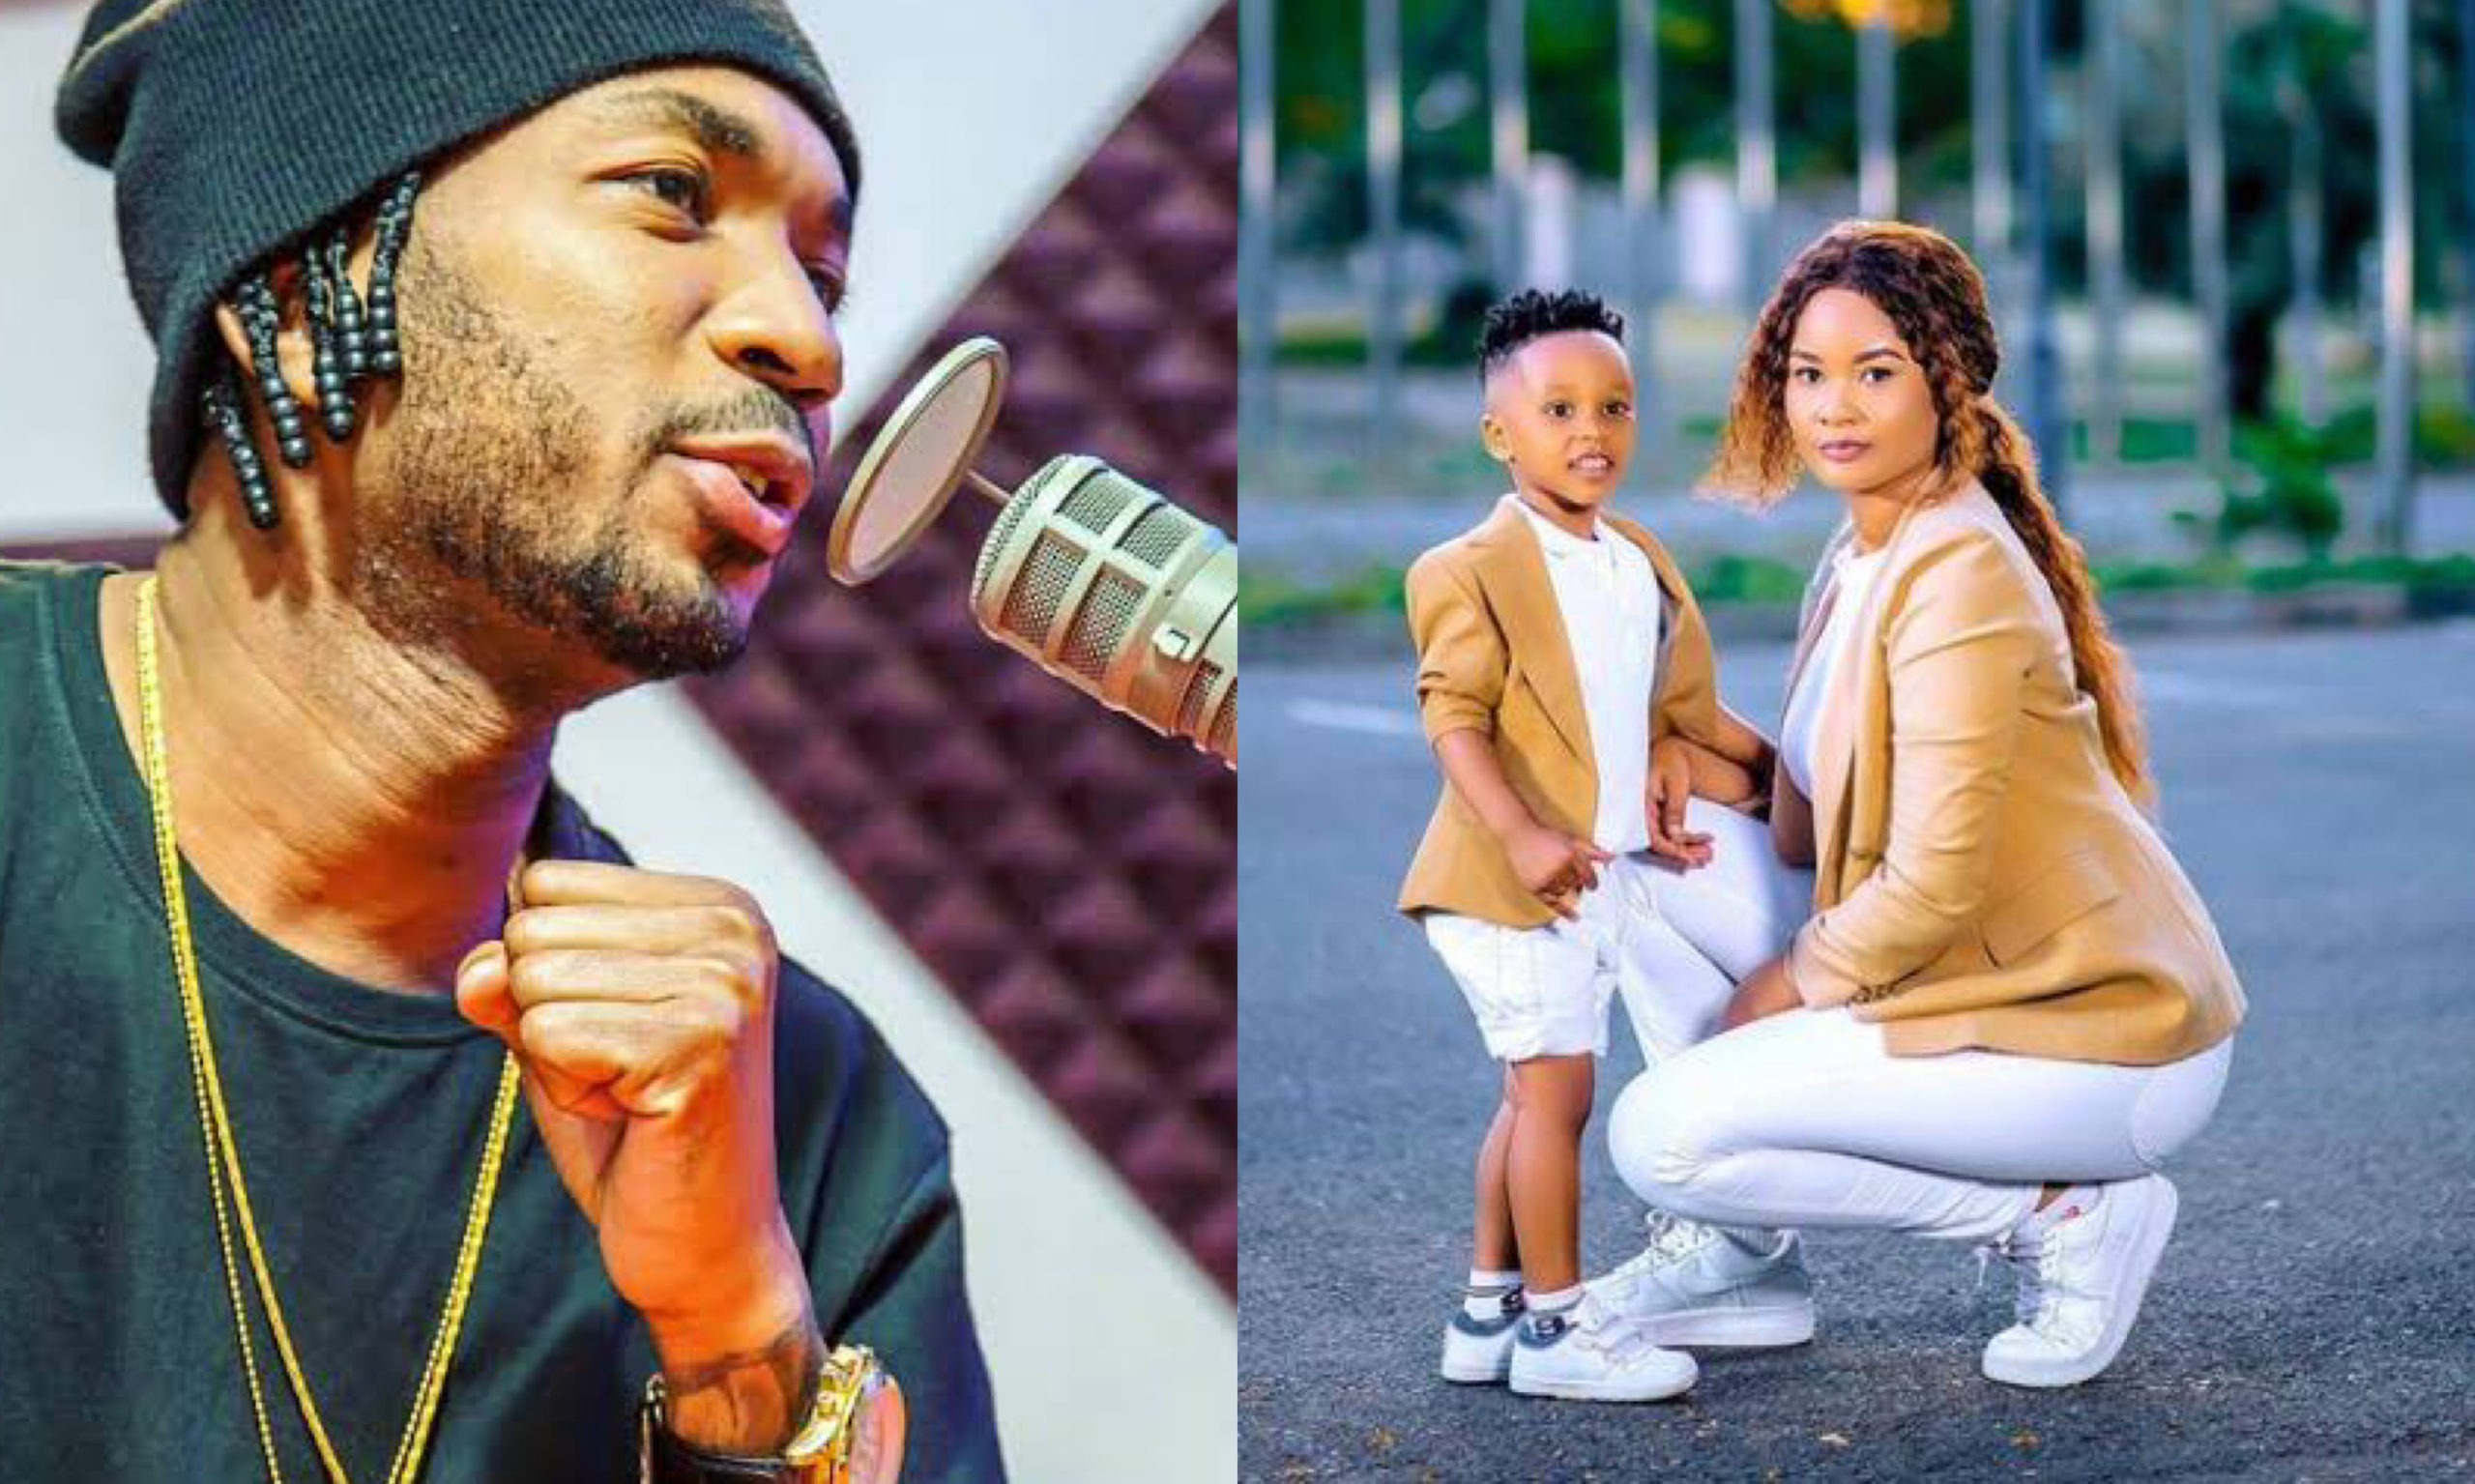 Diamond Platnumz brother takes a swipe at Hamisa Mobetto and son, Dylan